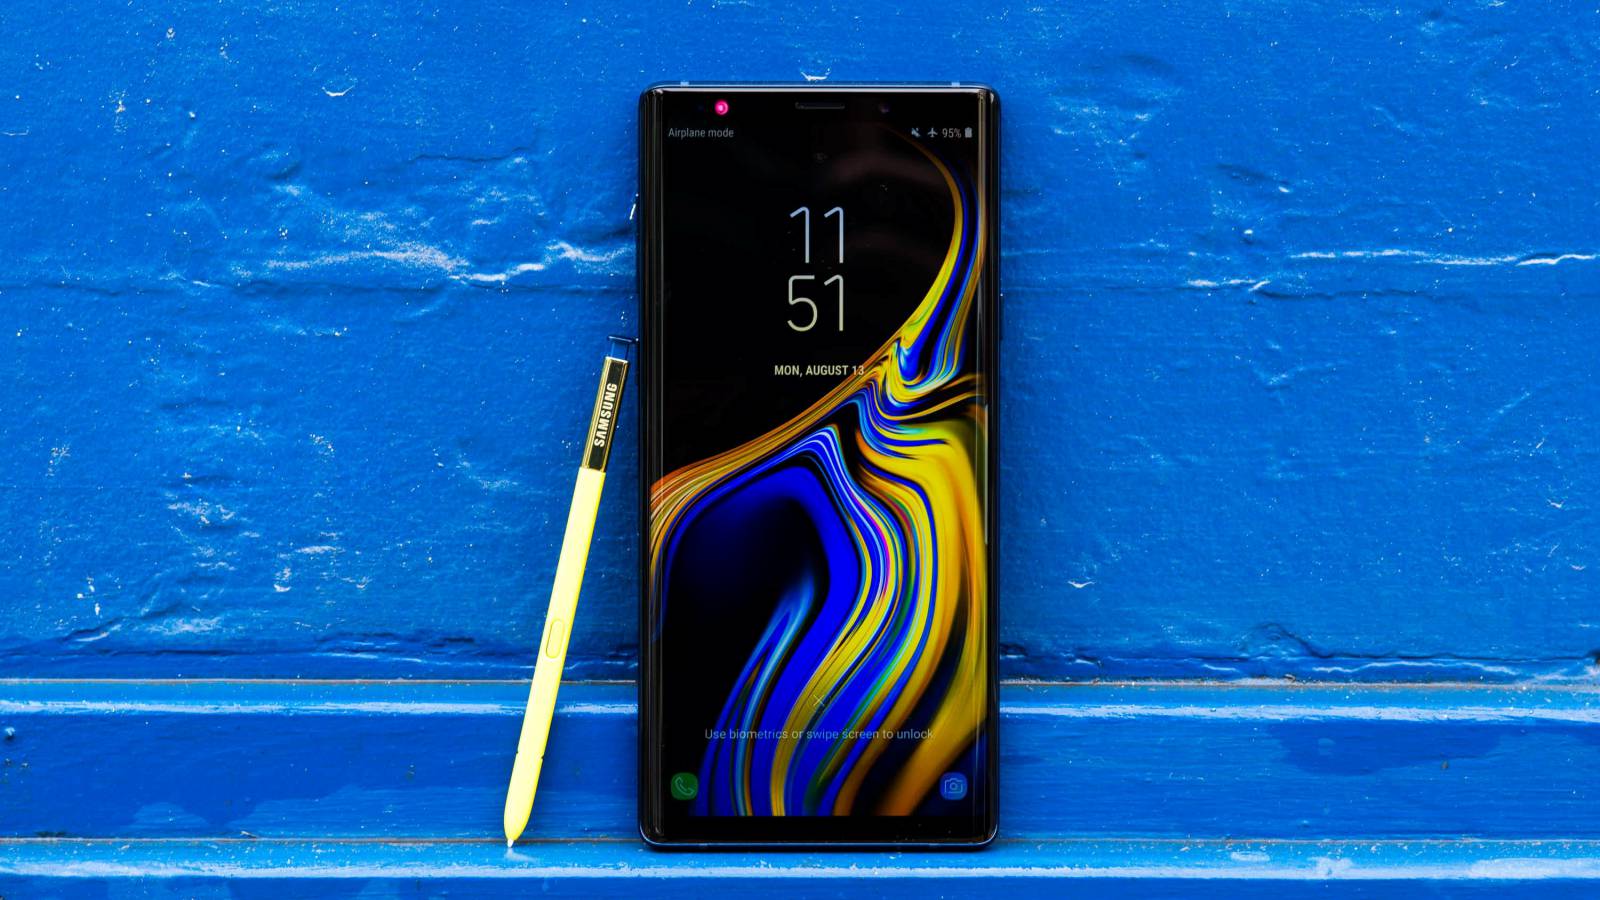 remises emag samsung galaxy note 9 7 octobre